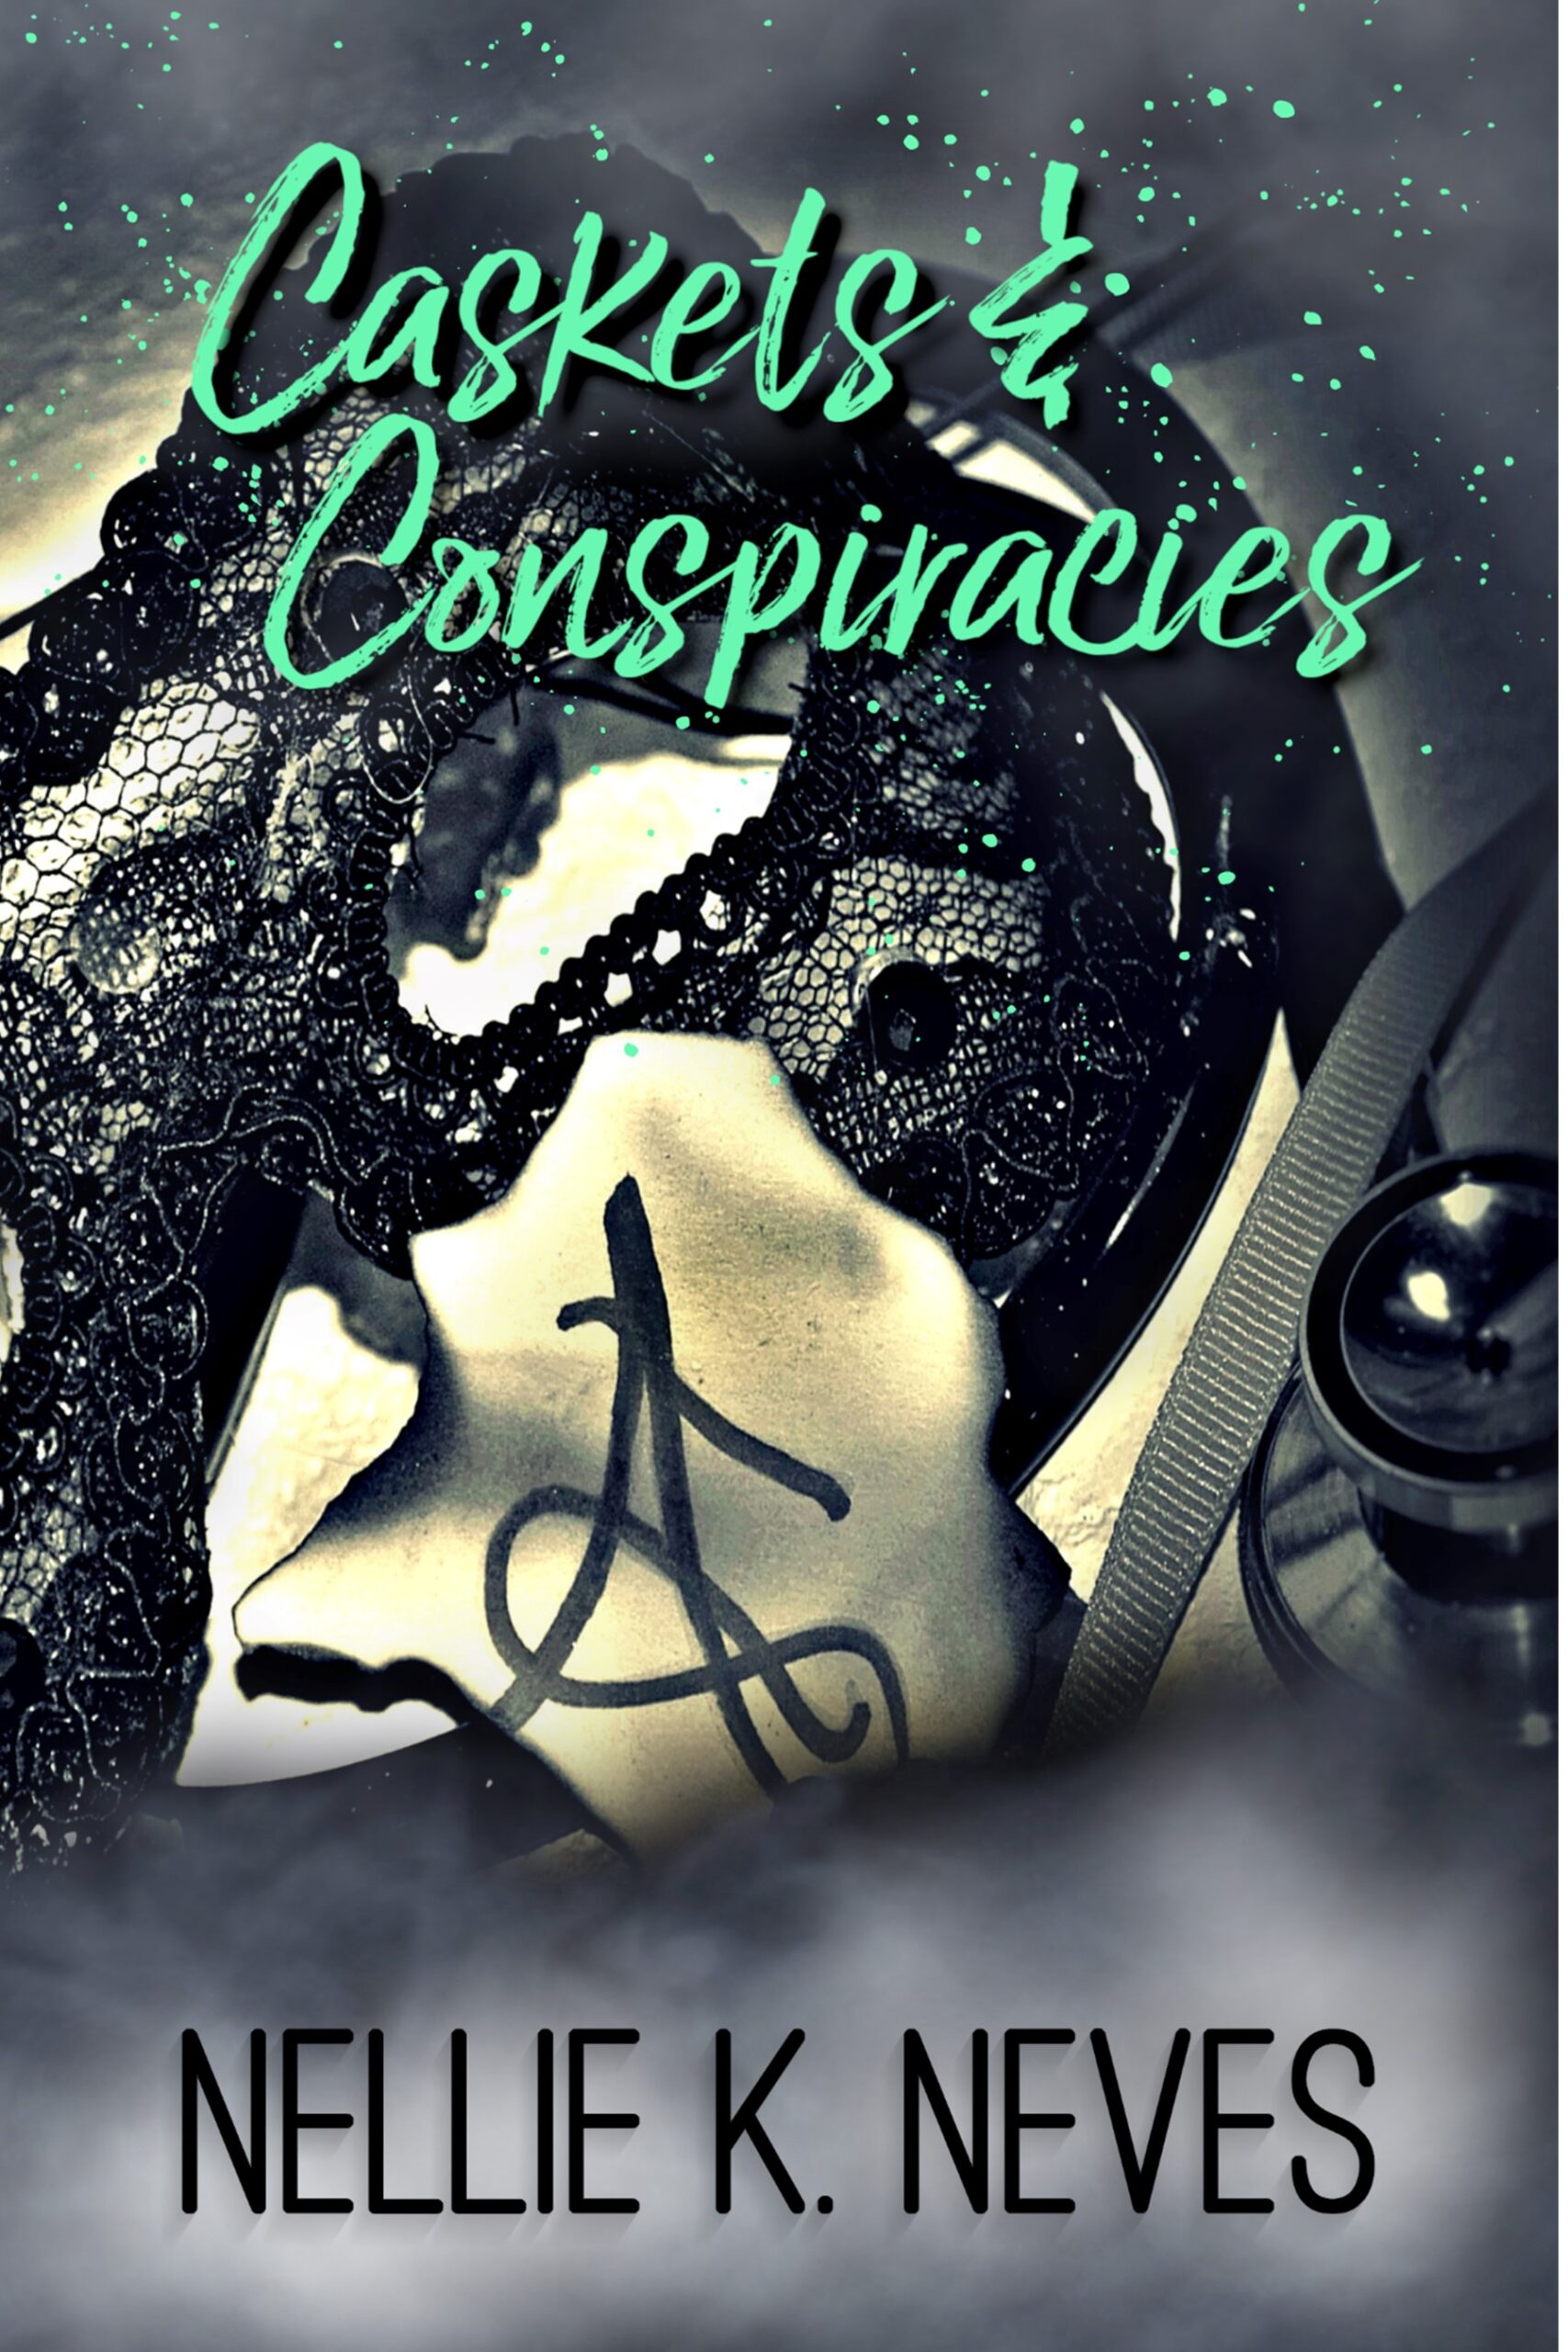 FREE: Caskets & Conspiracies by Nellie K Neves